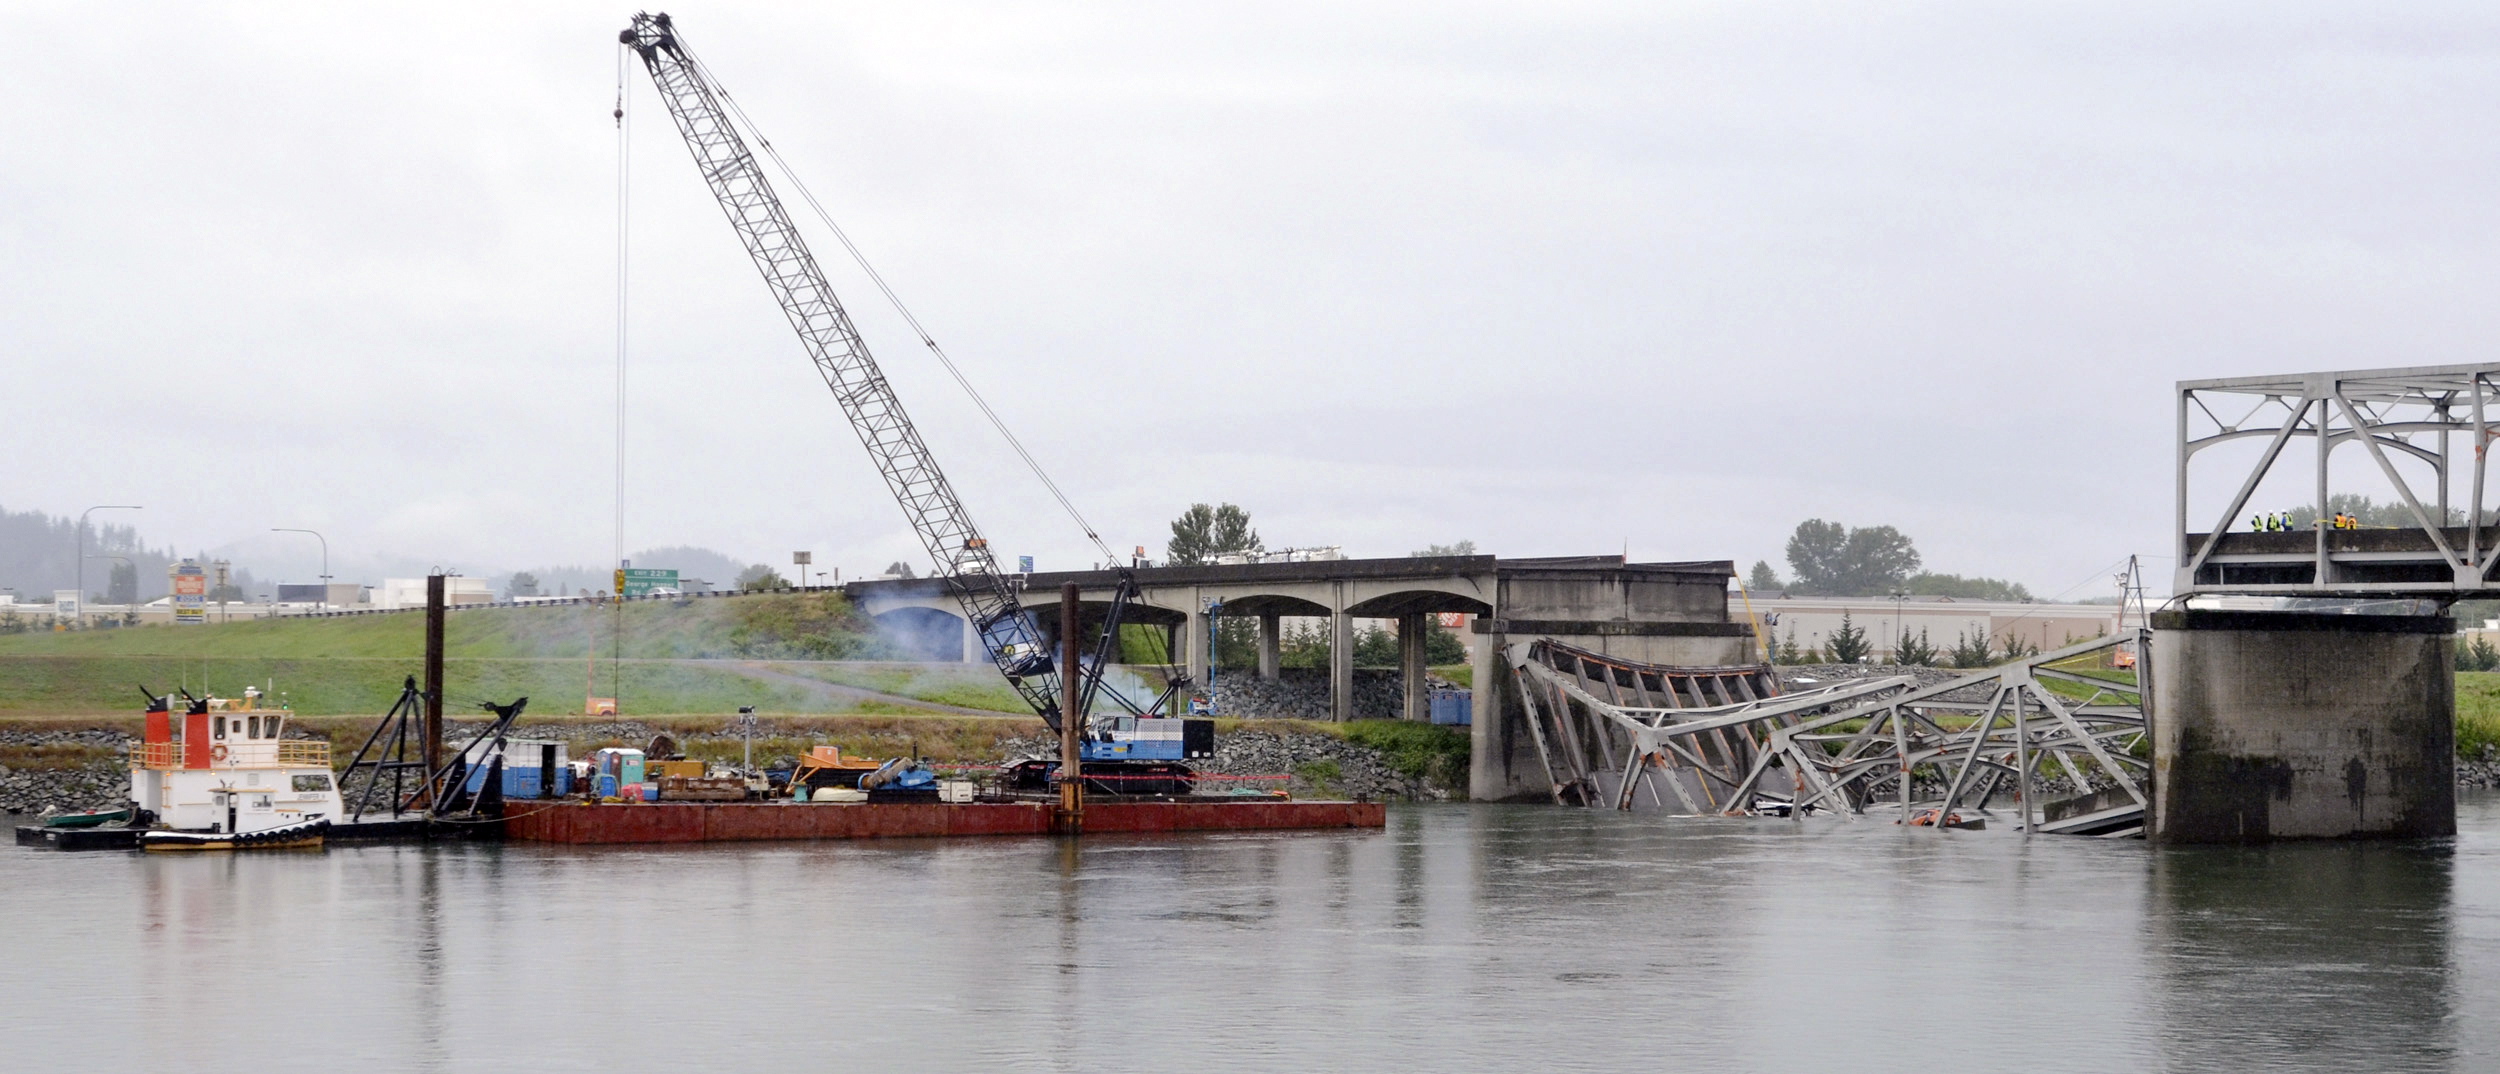 A view from the Mount Vernon side of the Skagit River shows a crane on a barge Sunday at the scene of the Interstate 5 bridge collapse in Washington.